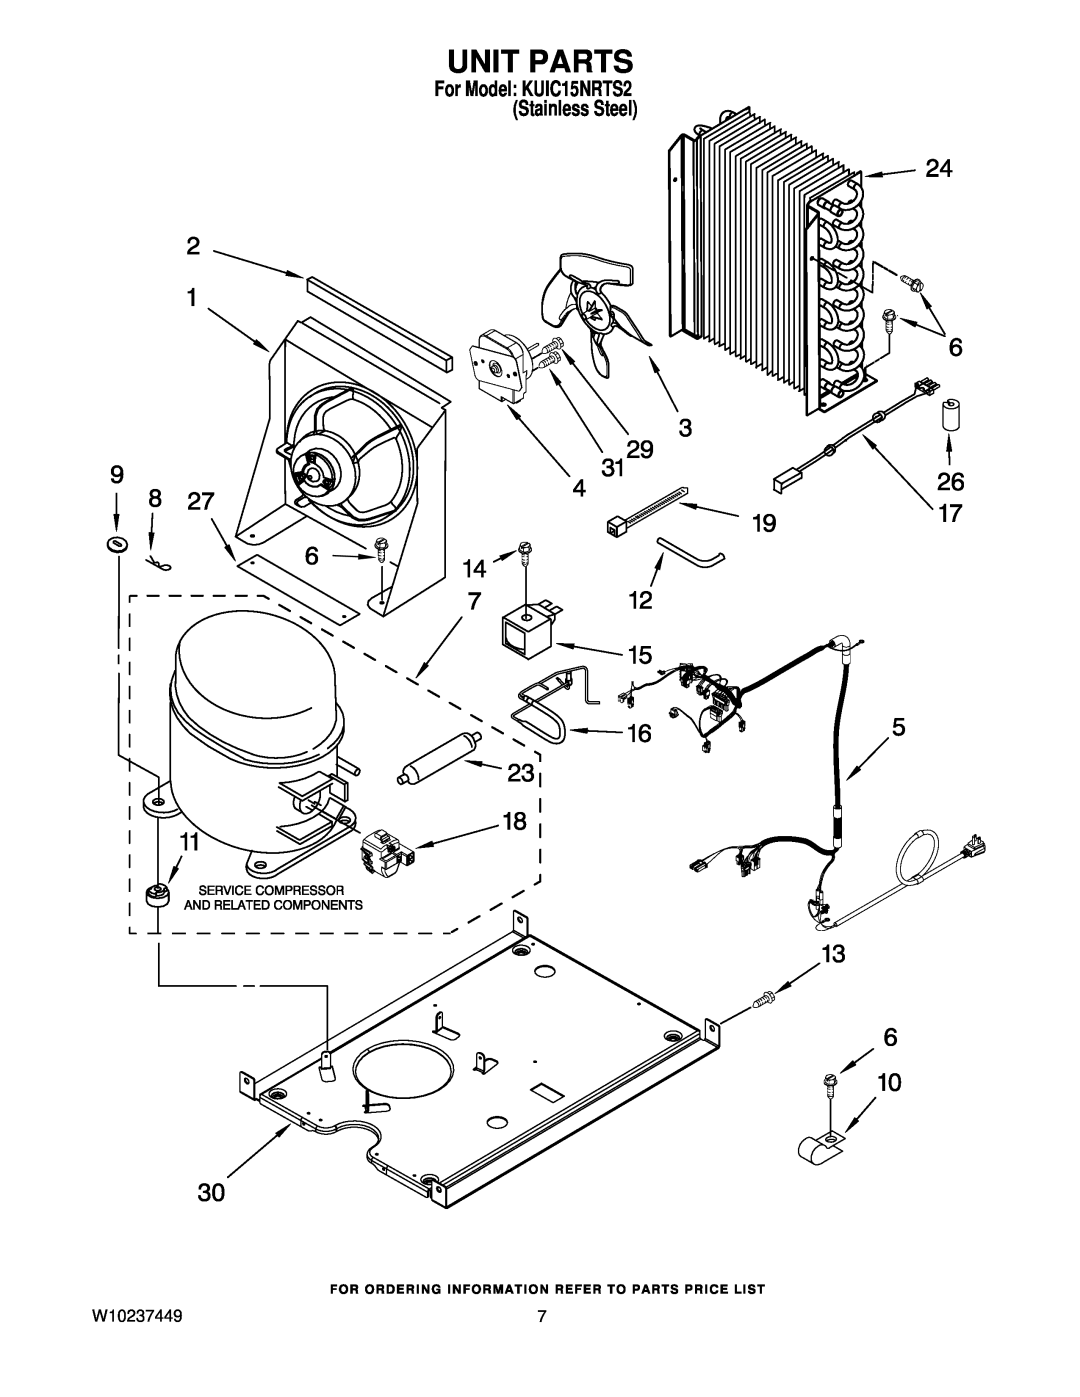 KitchenAid manual Unit Parts, W10237449, For Model KUIC15NRTS2 Stainless Steel 